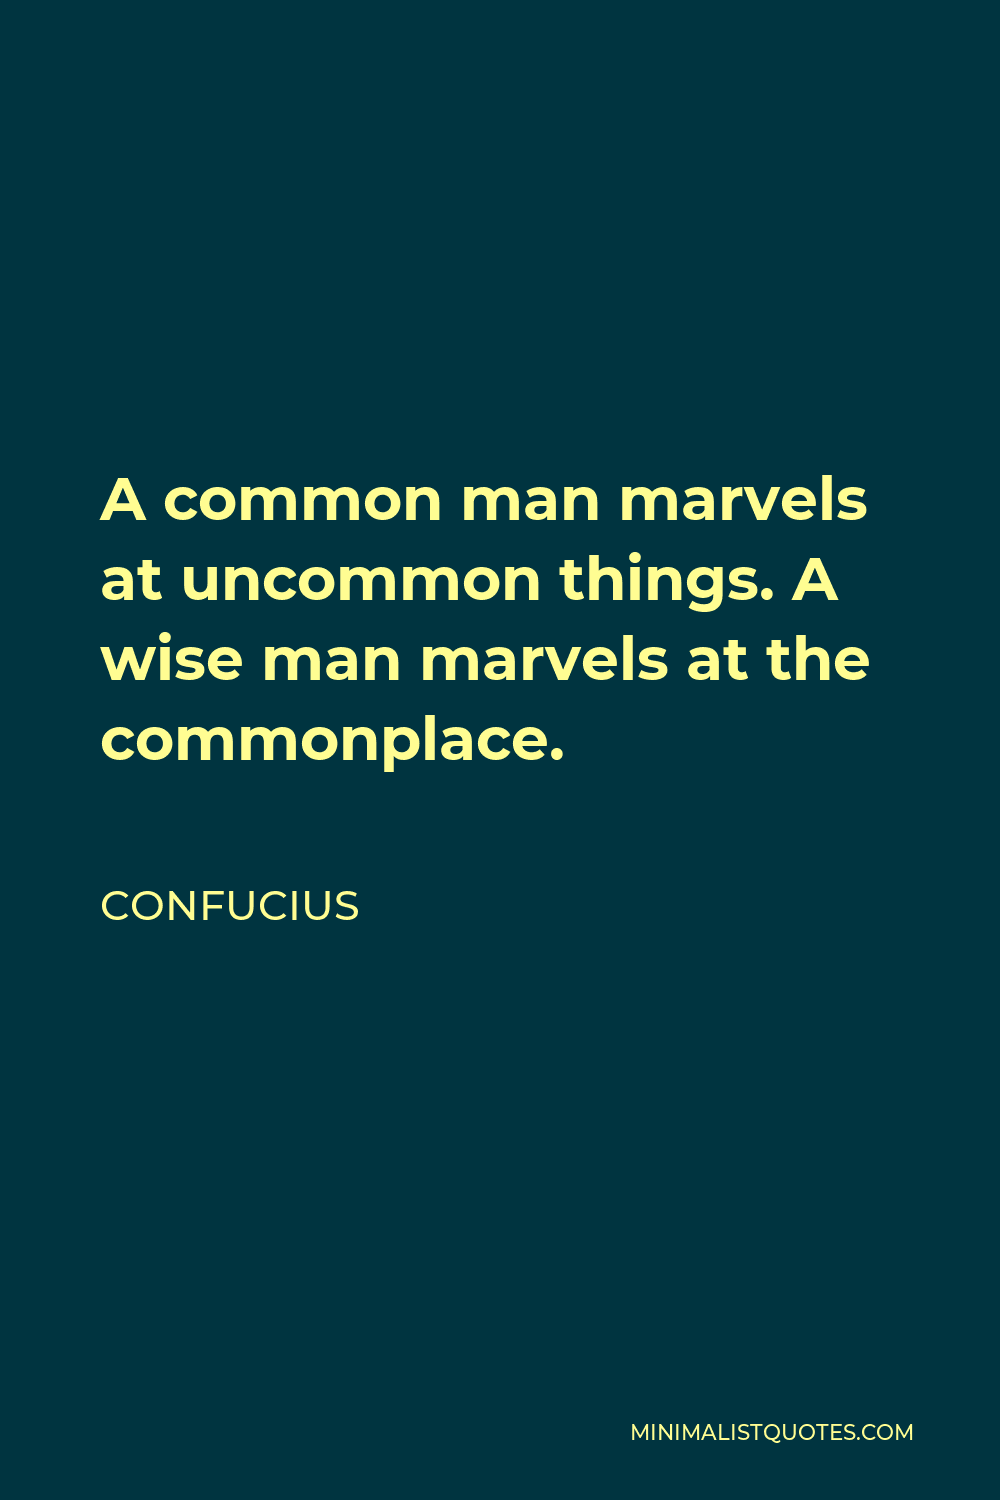 Confucius Quote - A common man marvels at uncommon things. A wise man marvels at the commonplace.